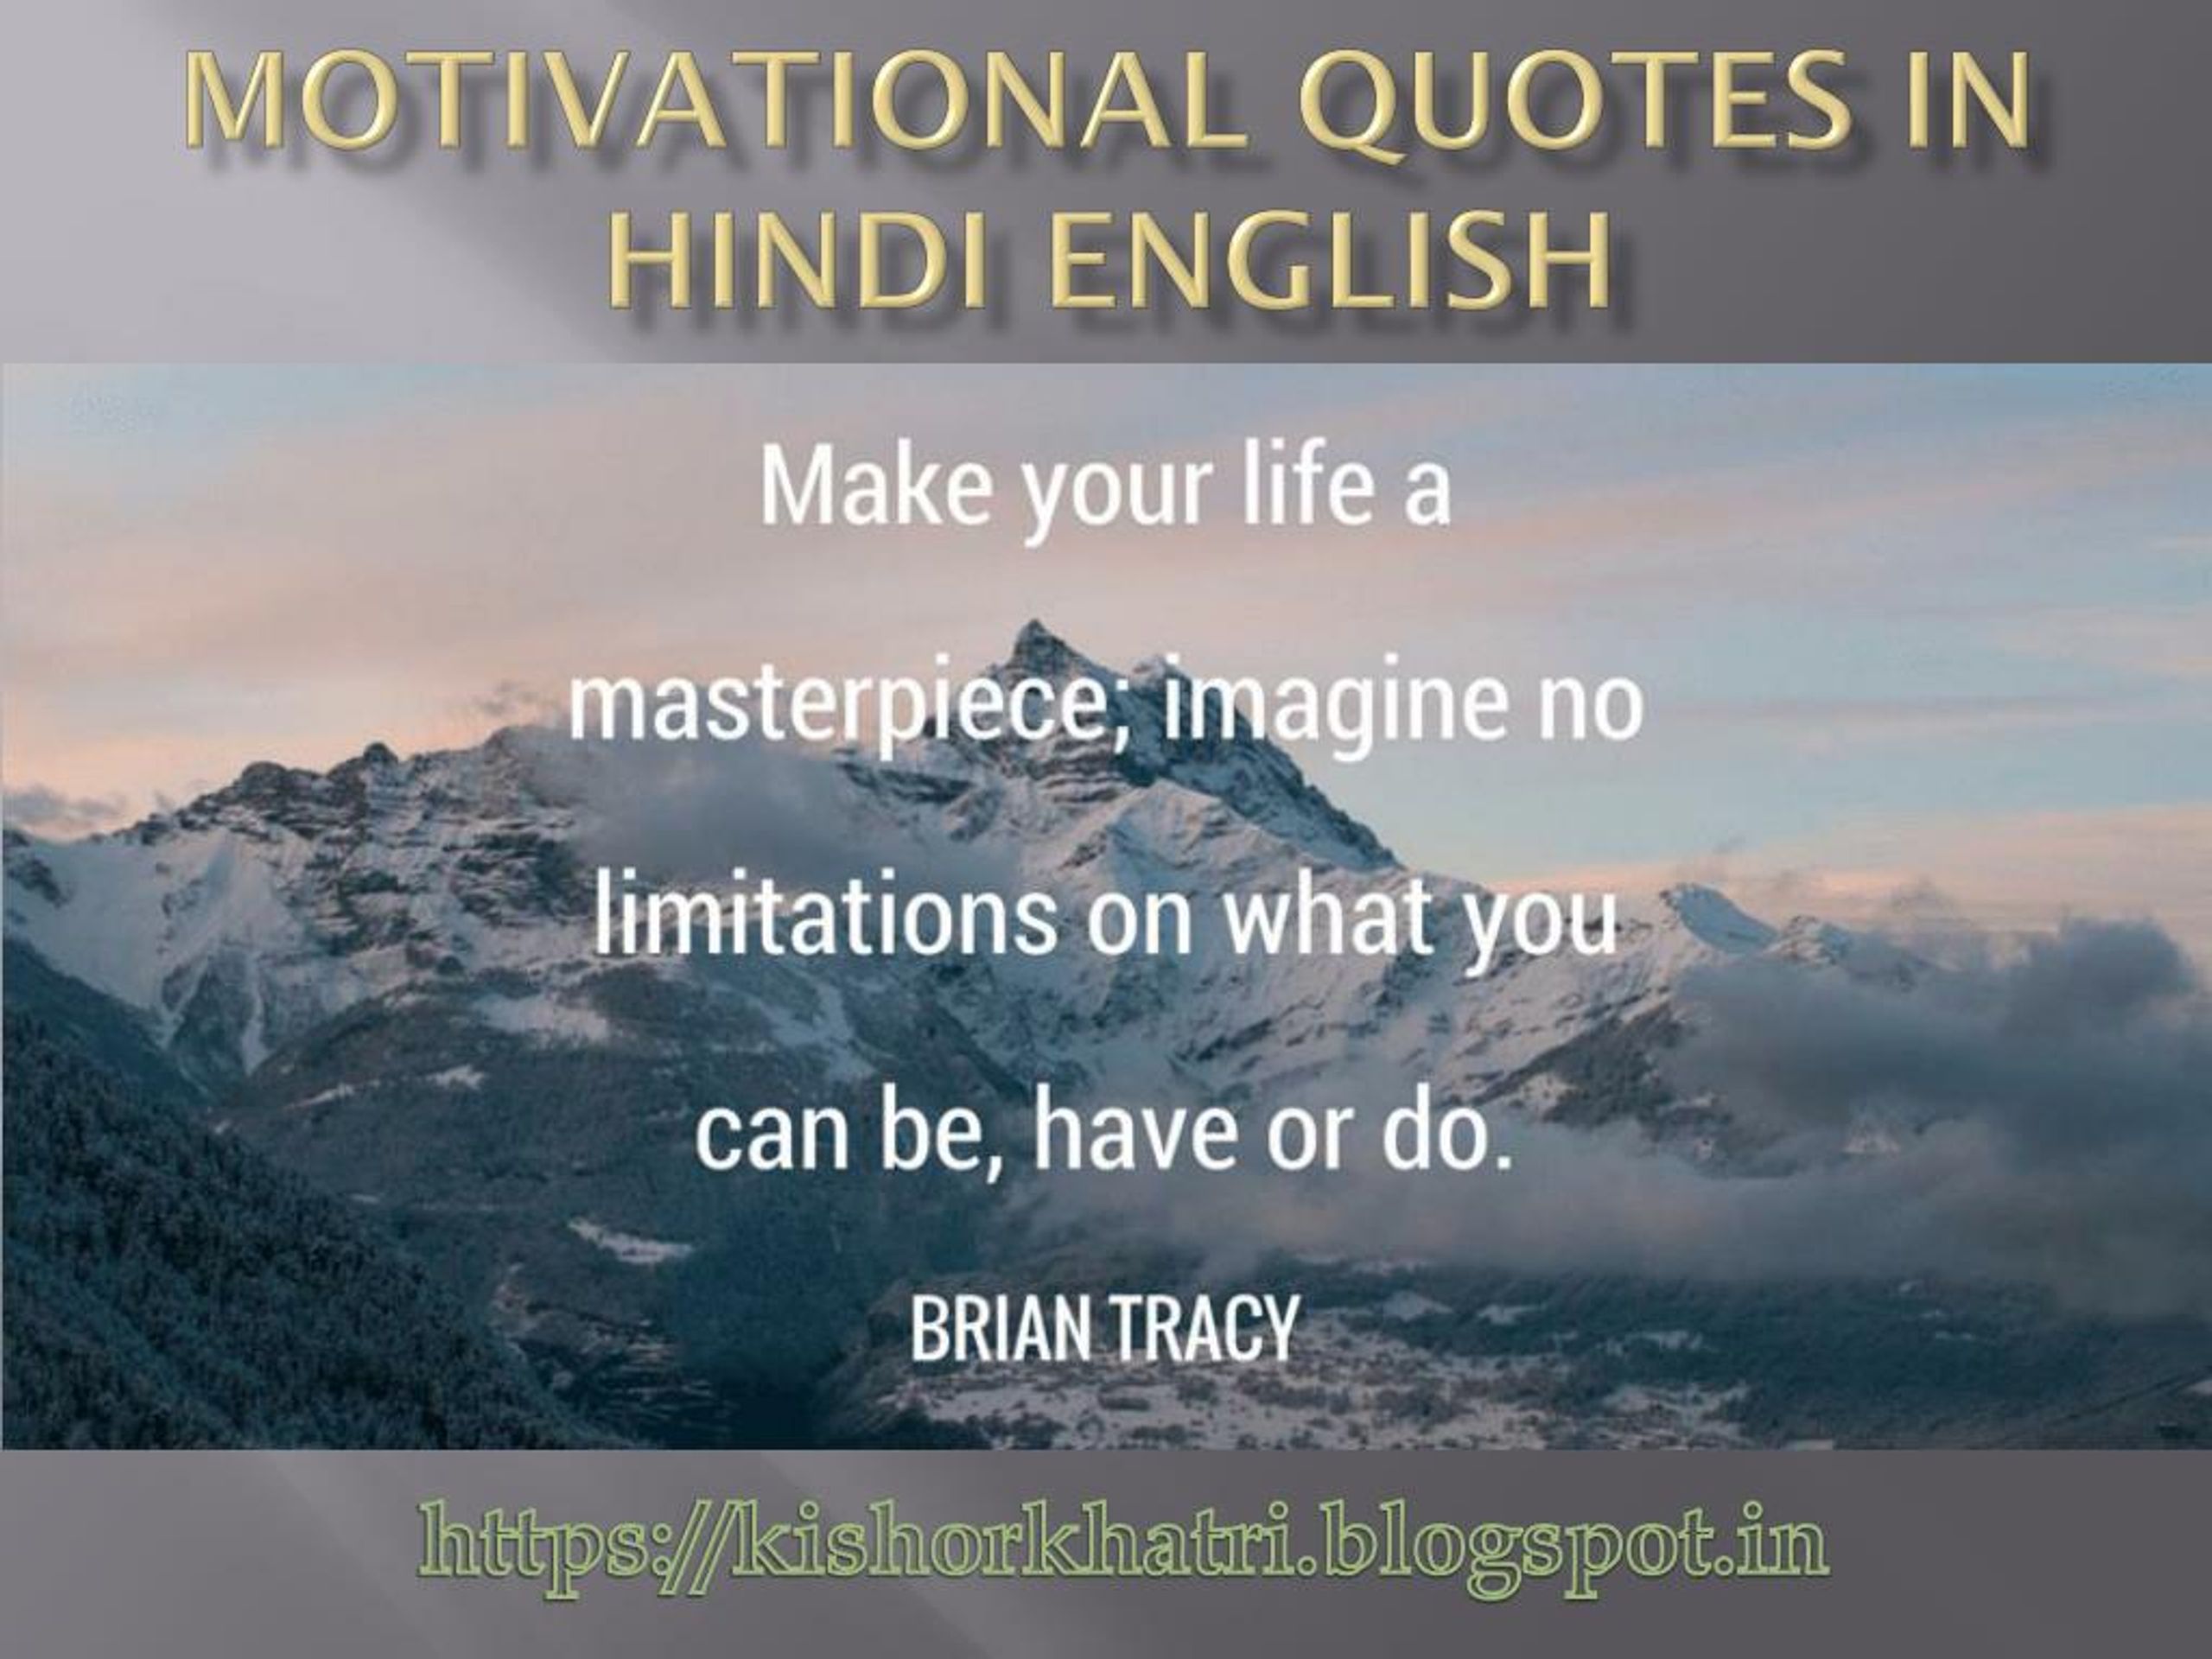 Ppt Motivational Quotes In Hindi English Powerpoint Presentation